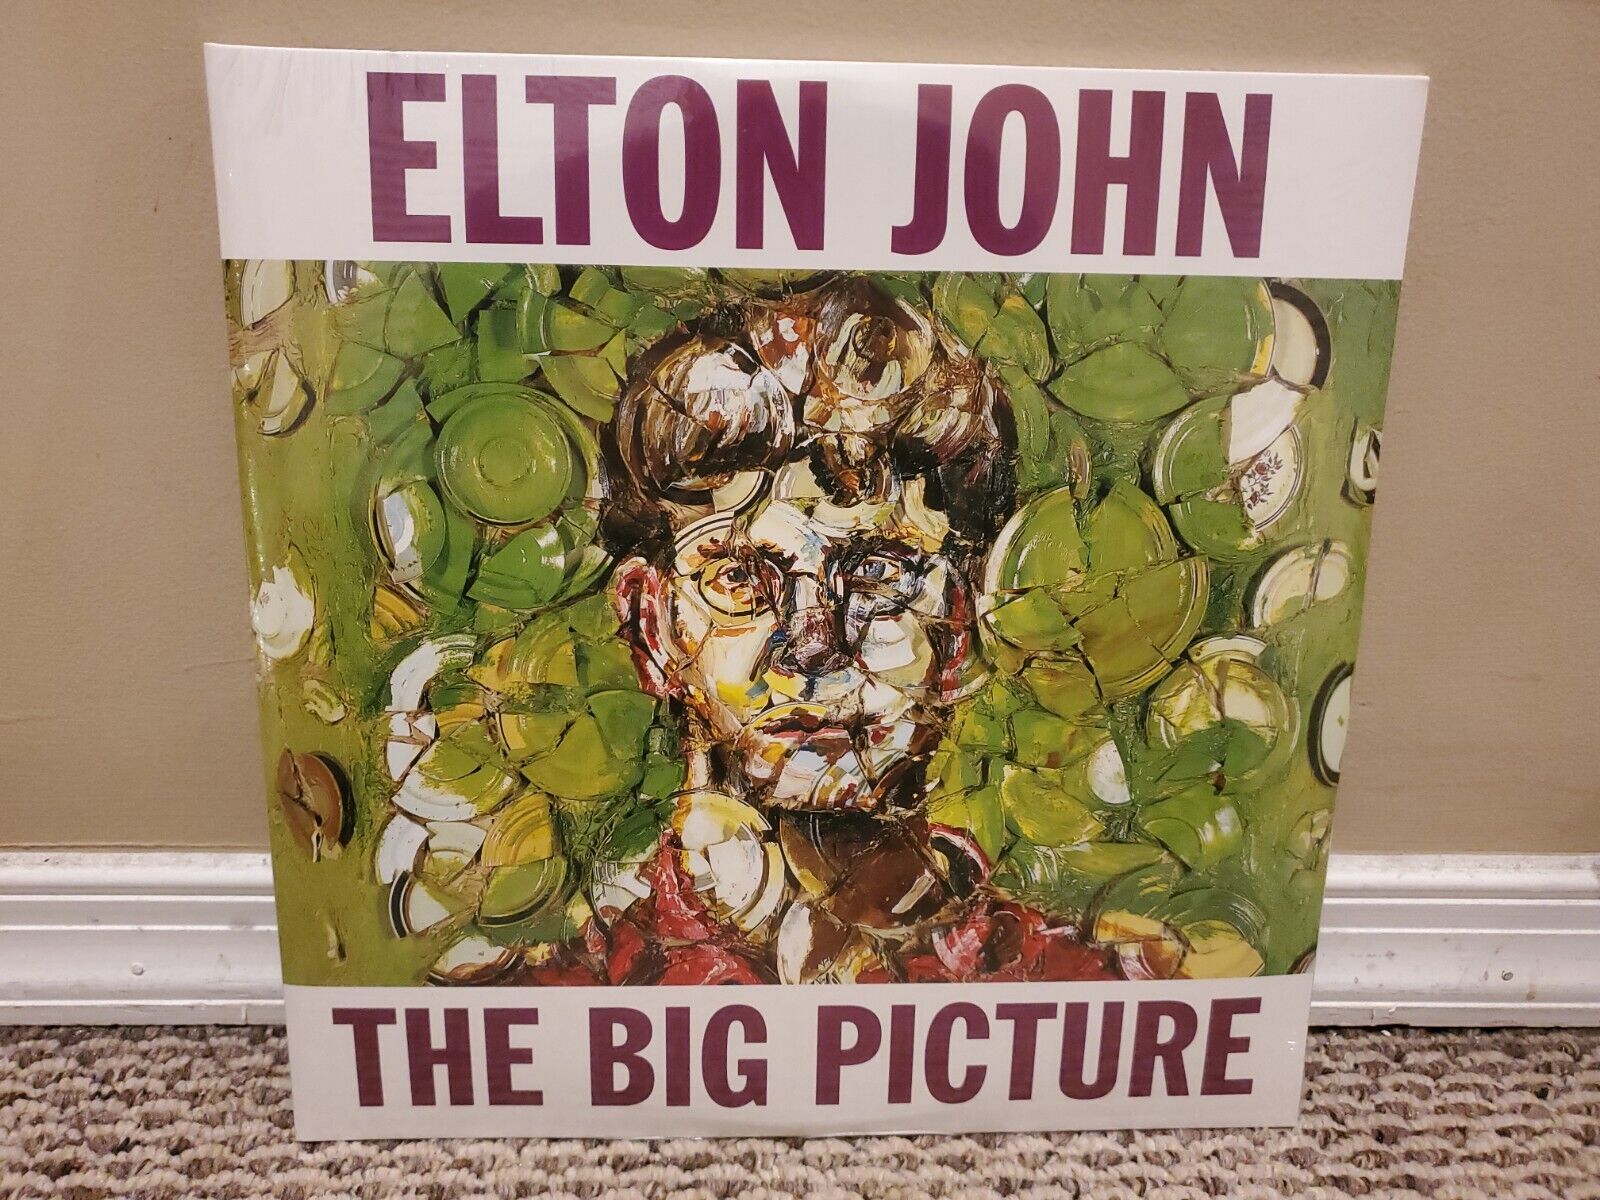 The Big Picture by Elton John (2xLP, Record, 2017) New Sealed